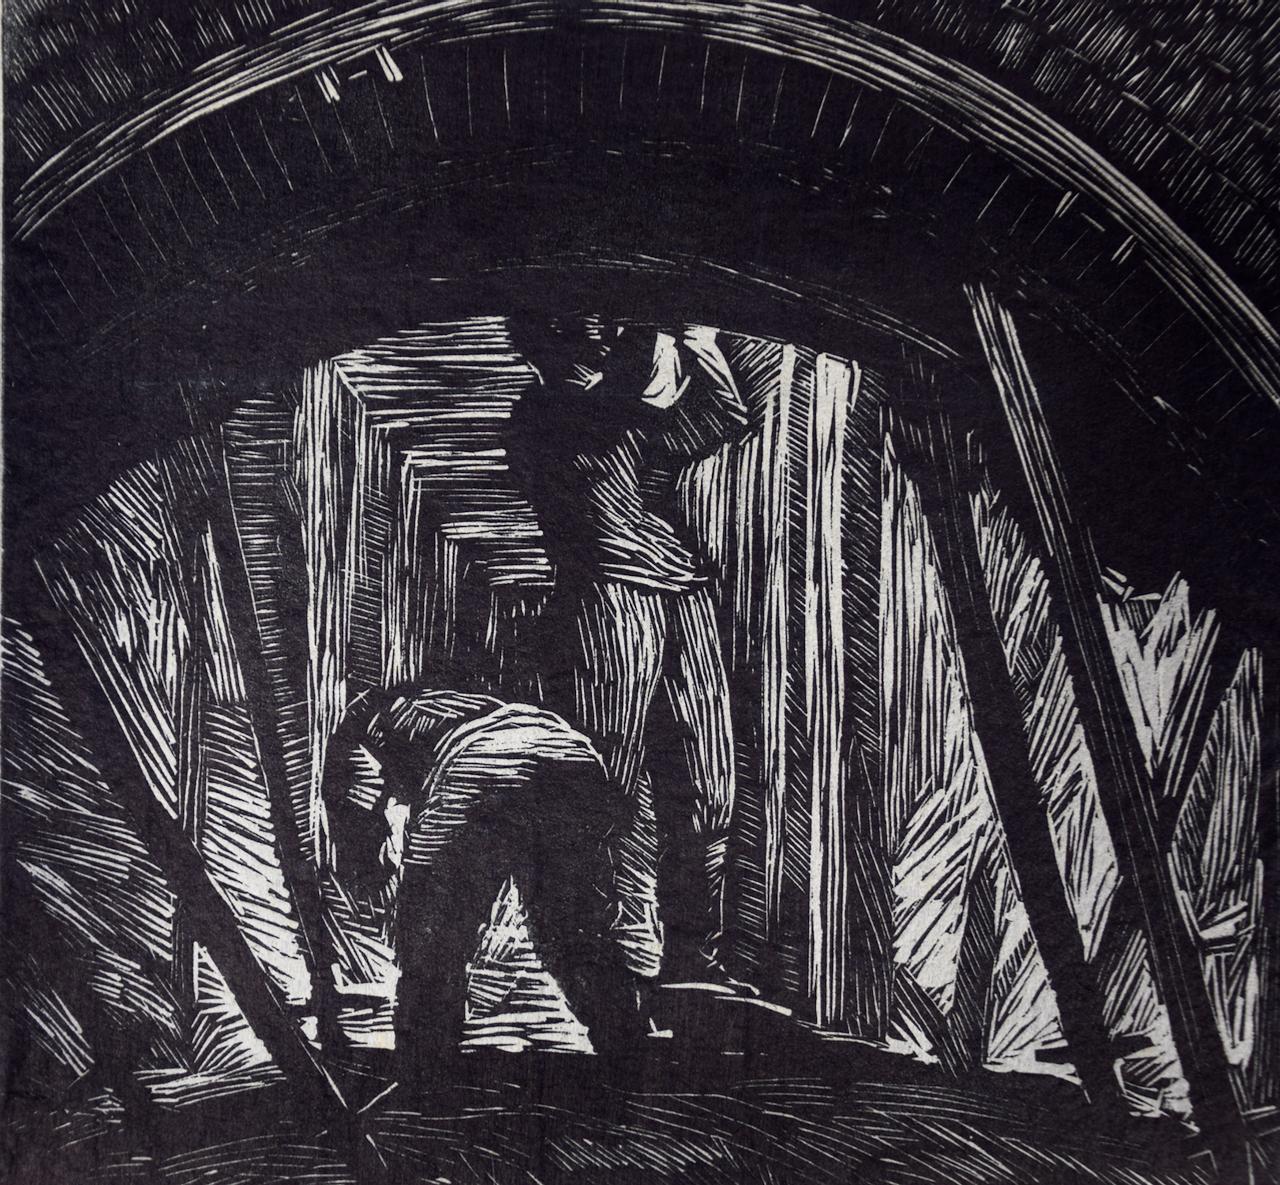  "Mine Shaft", Soviet Union: An Early 20th C. Woodcut Engraving by Abramovitz